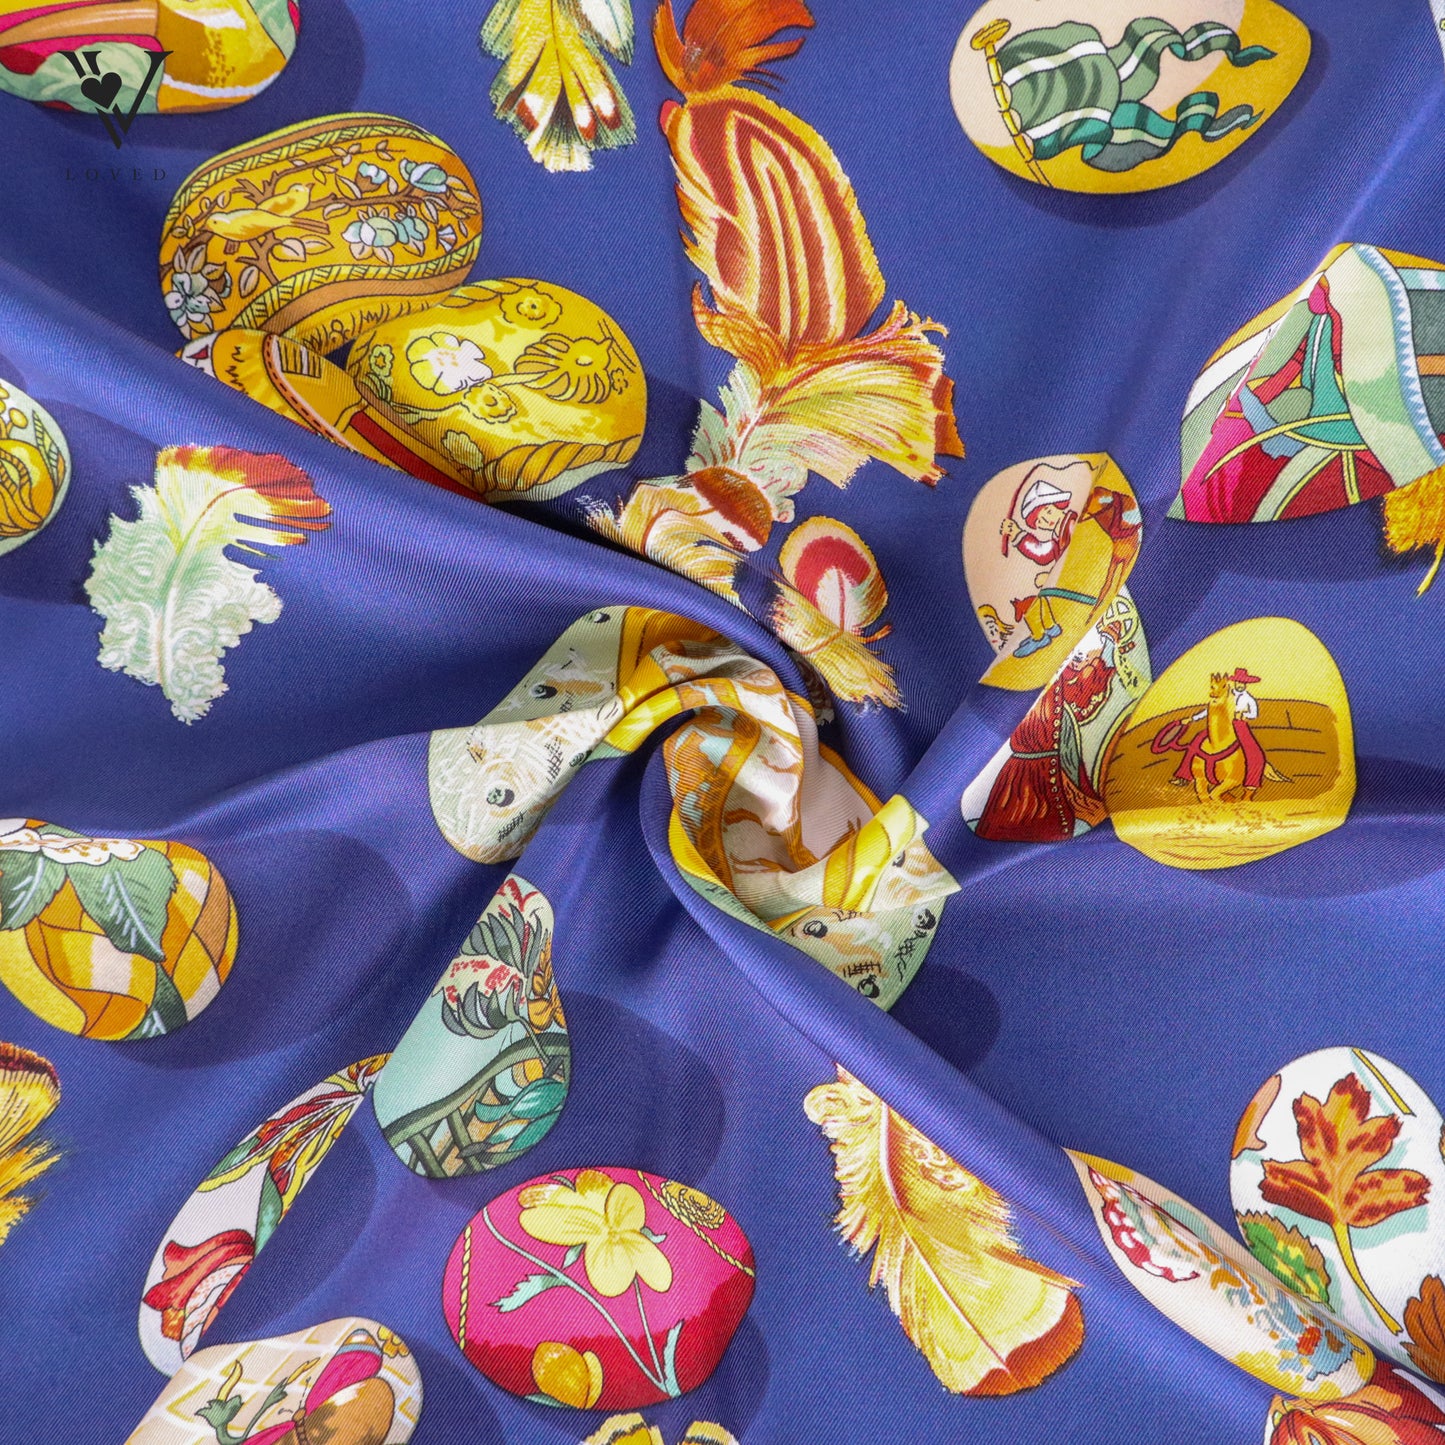 "Couvee d'Hermes" by Caty Latham Silk Scarf